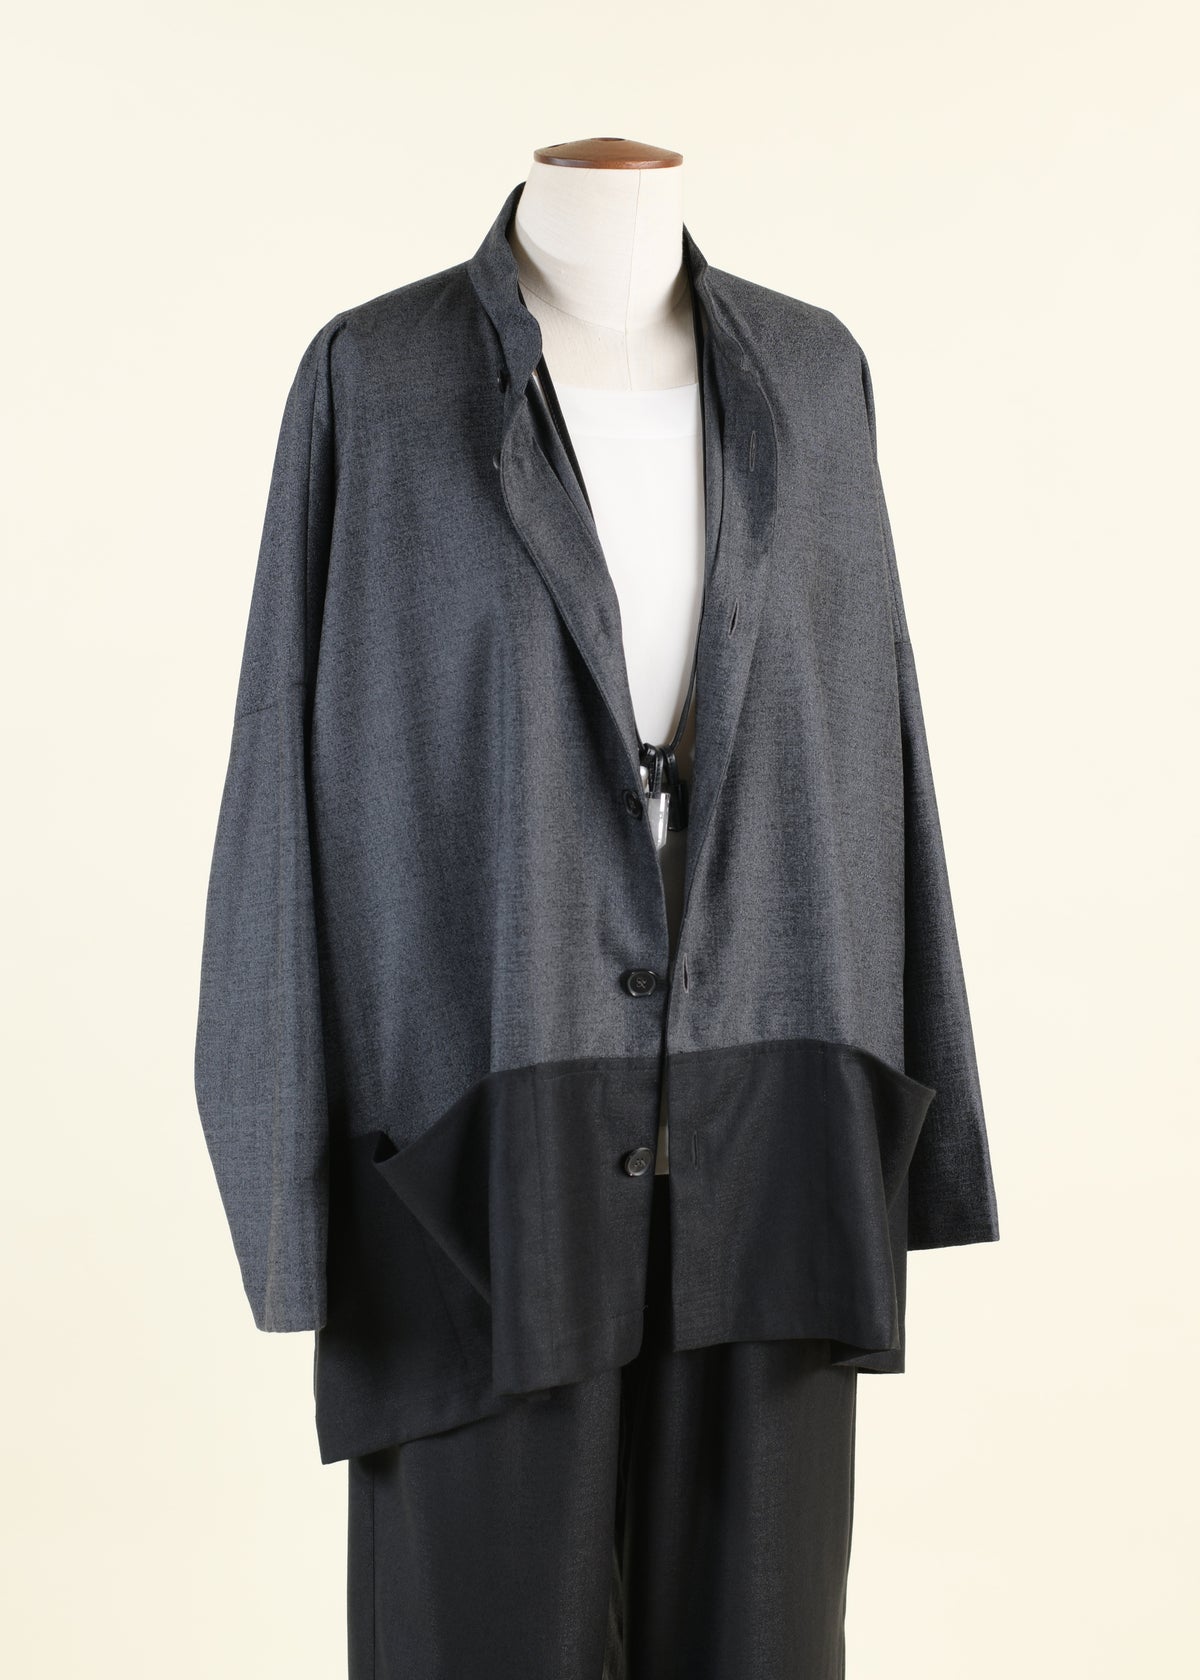 longer back wide mandarin jacket with contrast edge and pouch pockets - long